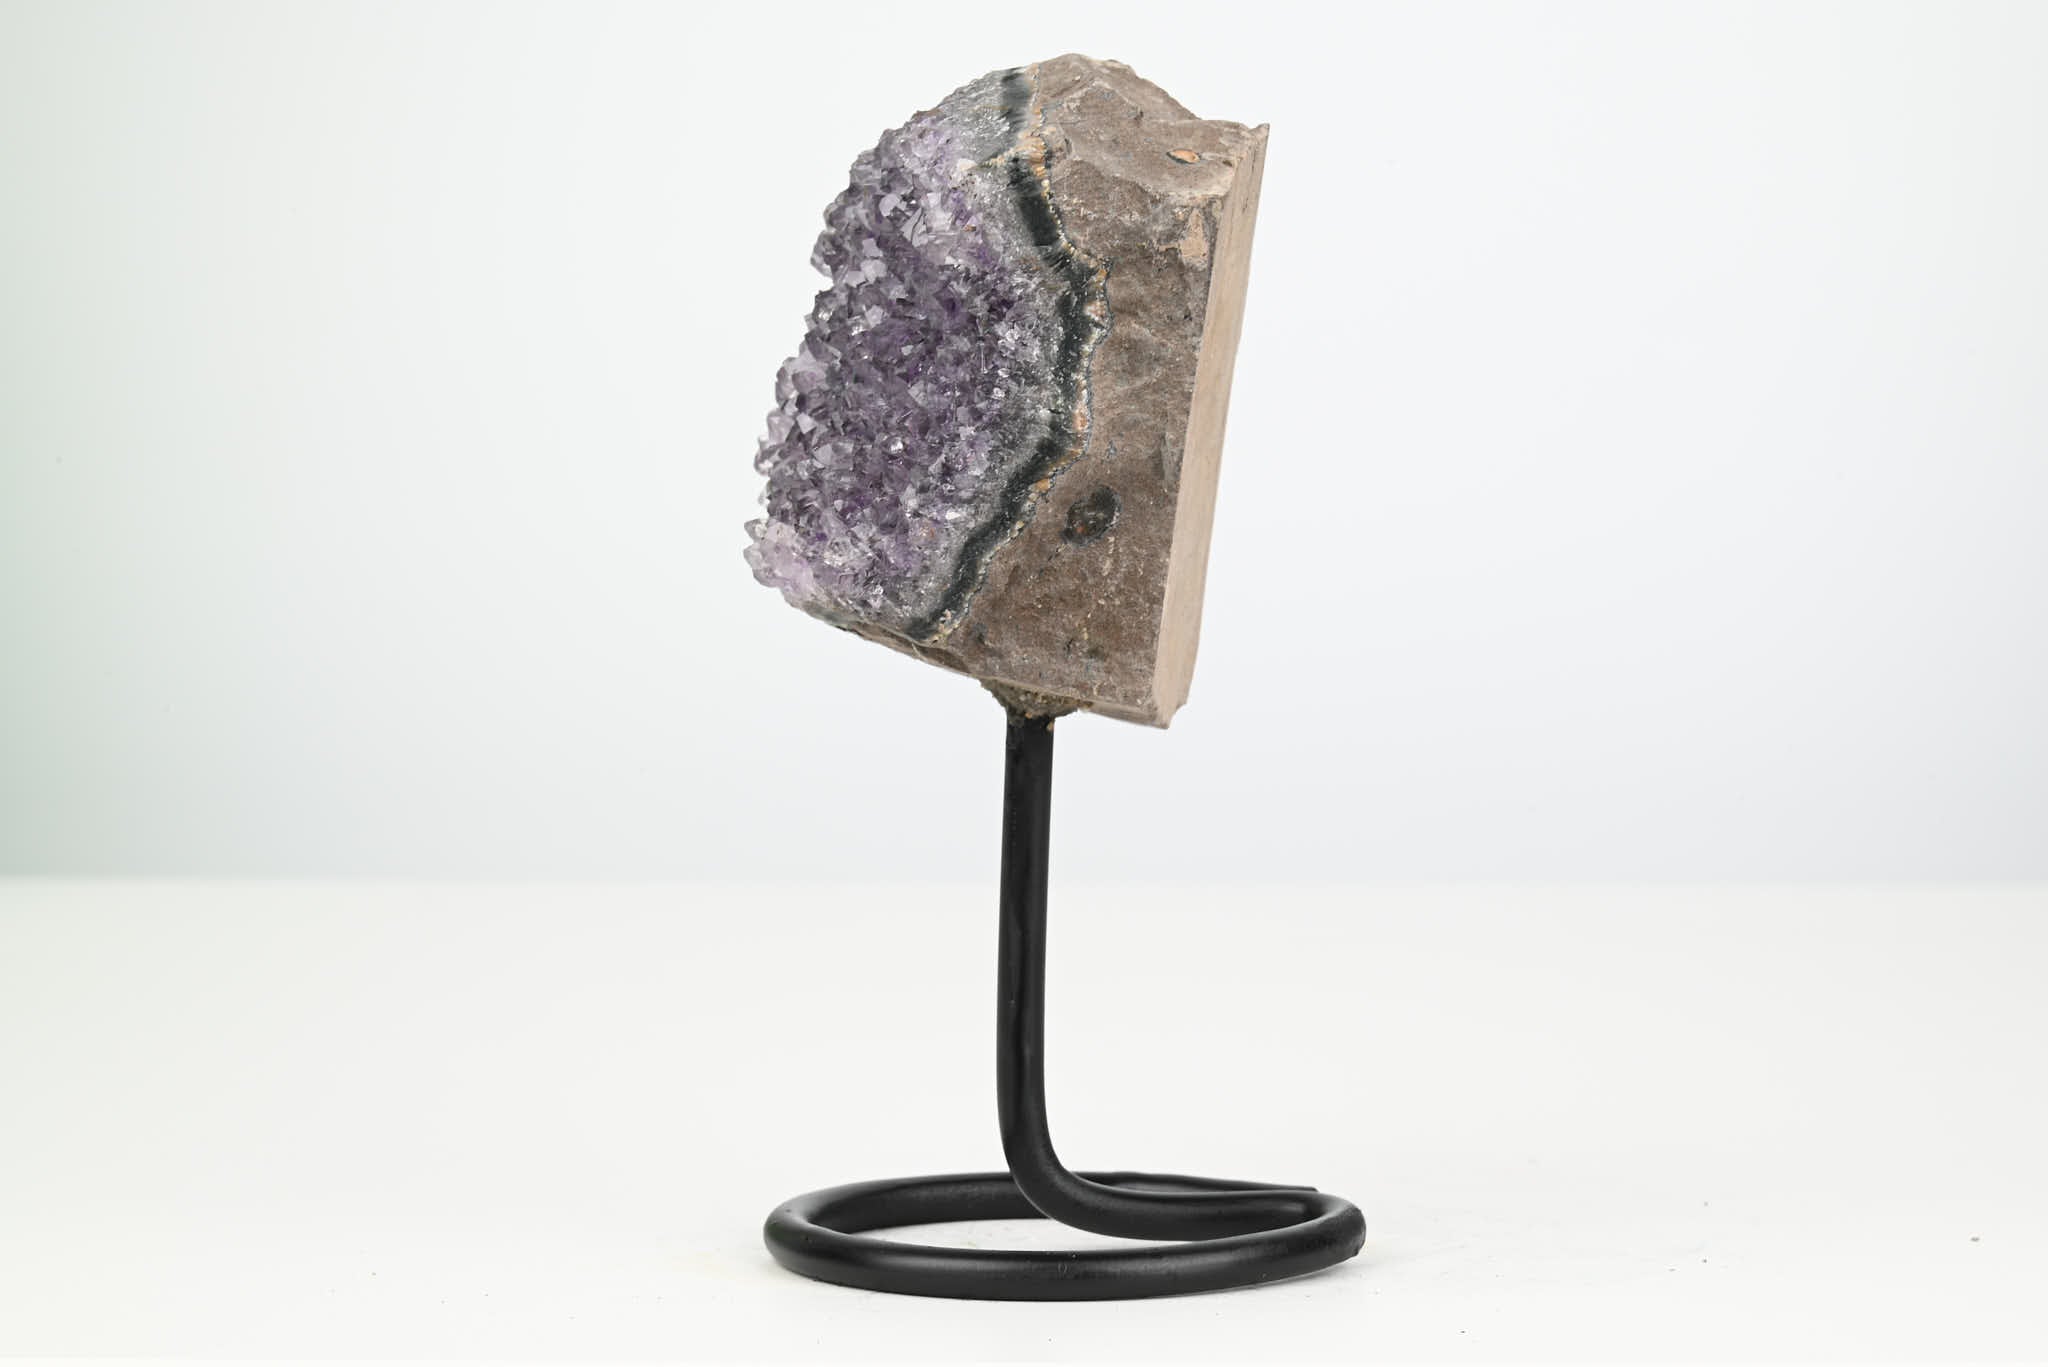 Amethyst Cluster on Stand - Small 13cm Tall - #CLUSAM-63044